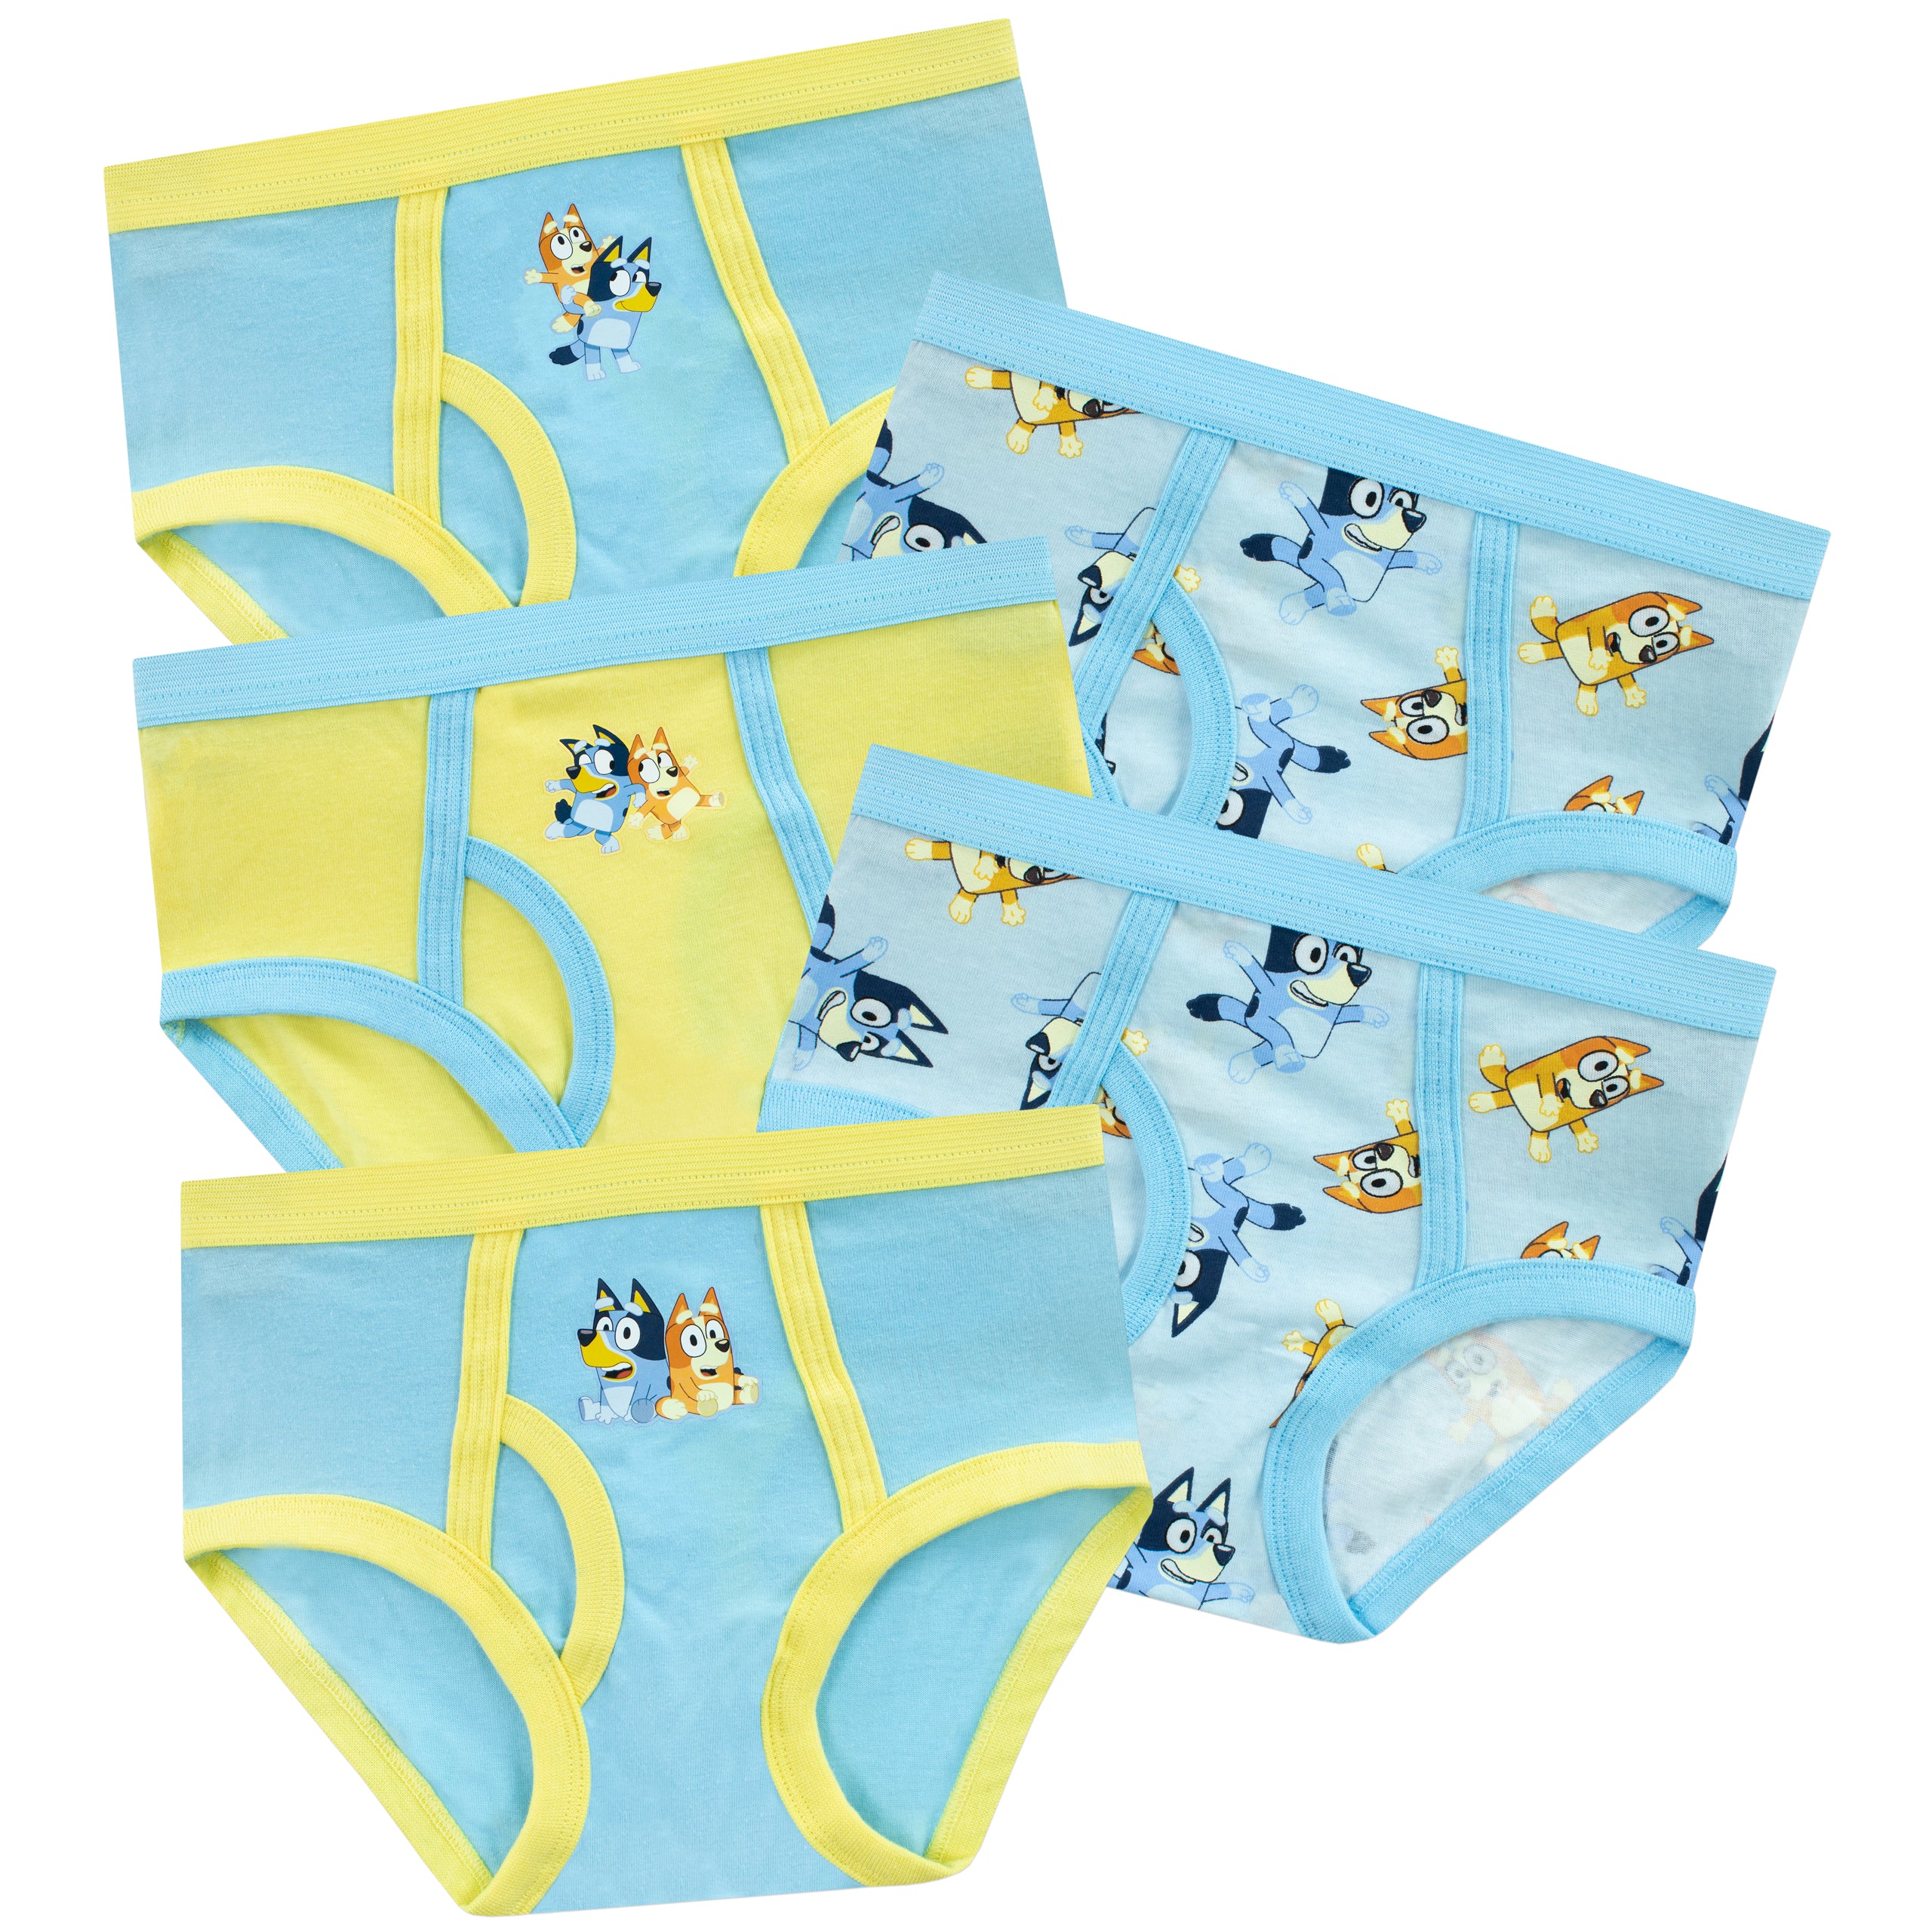 Bluey Character Print Briefs 5 Pack, Kids